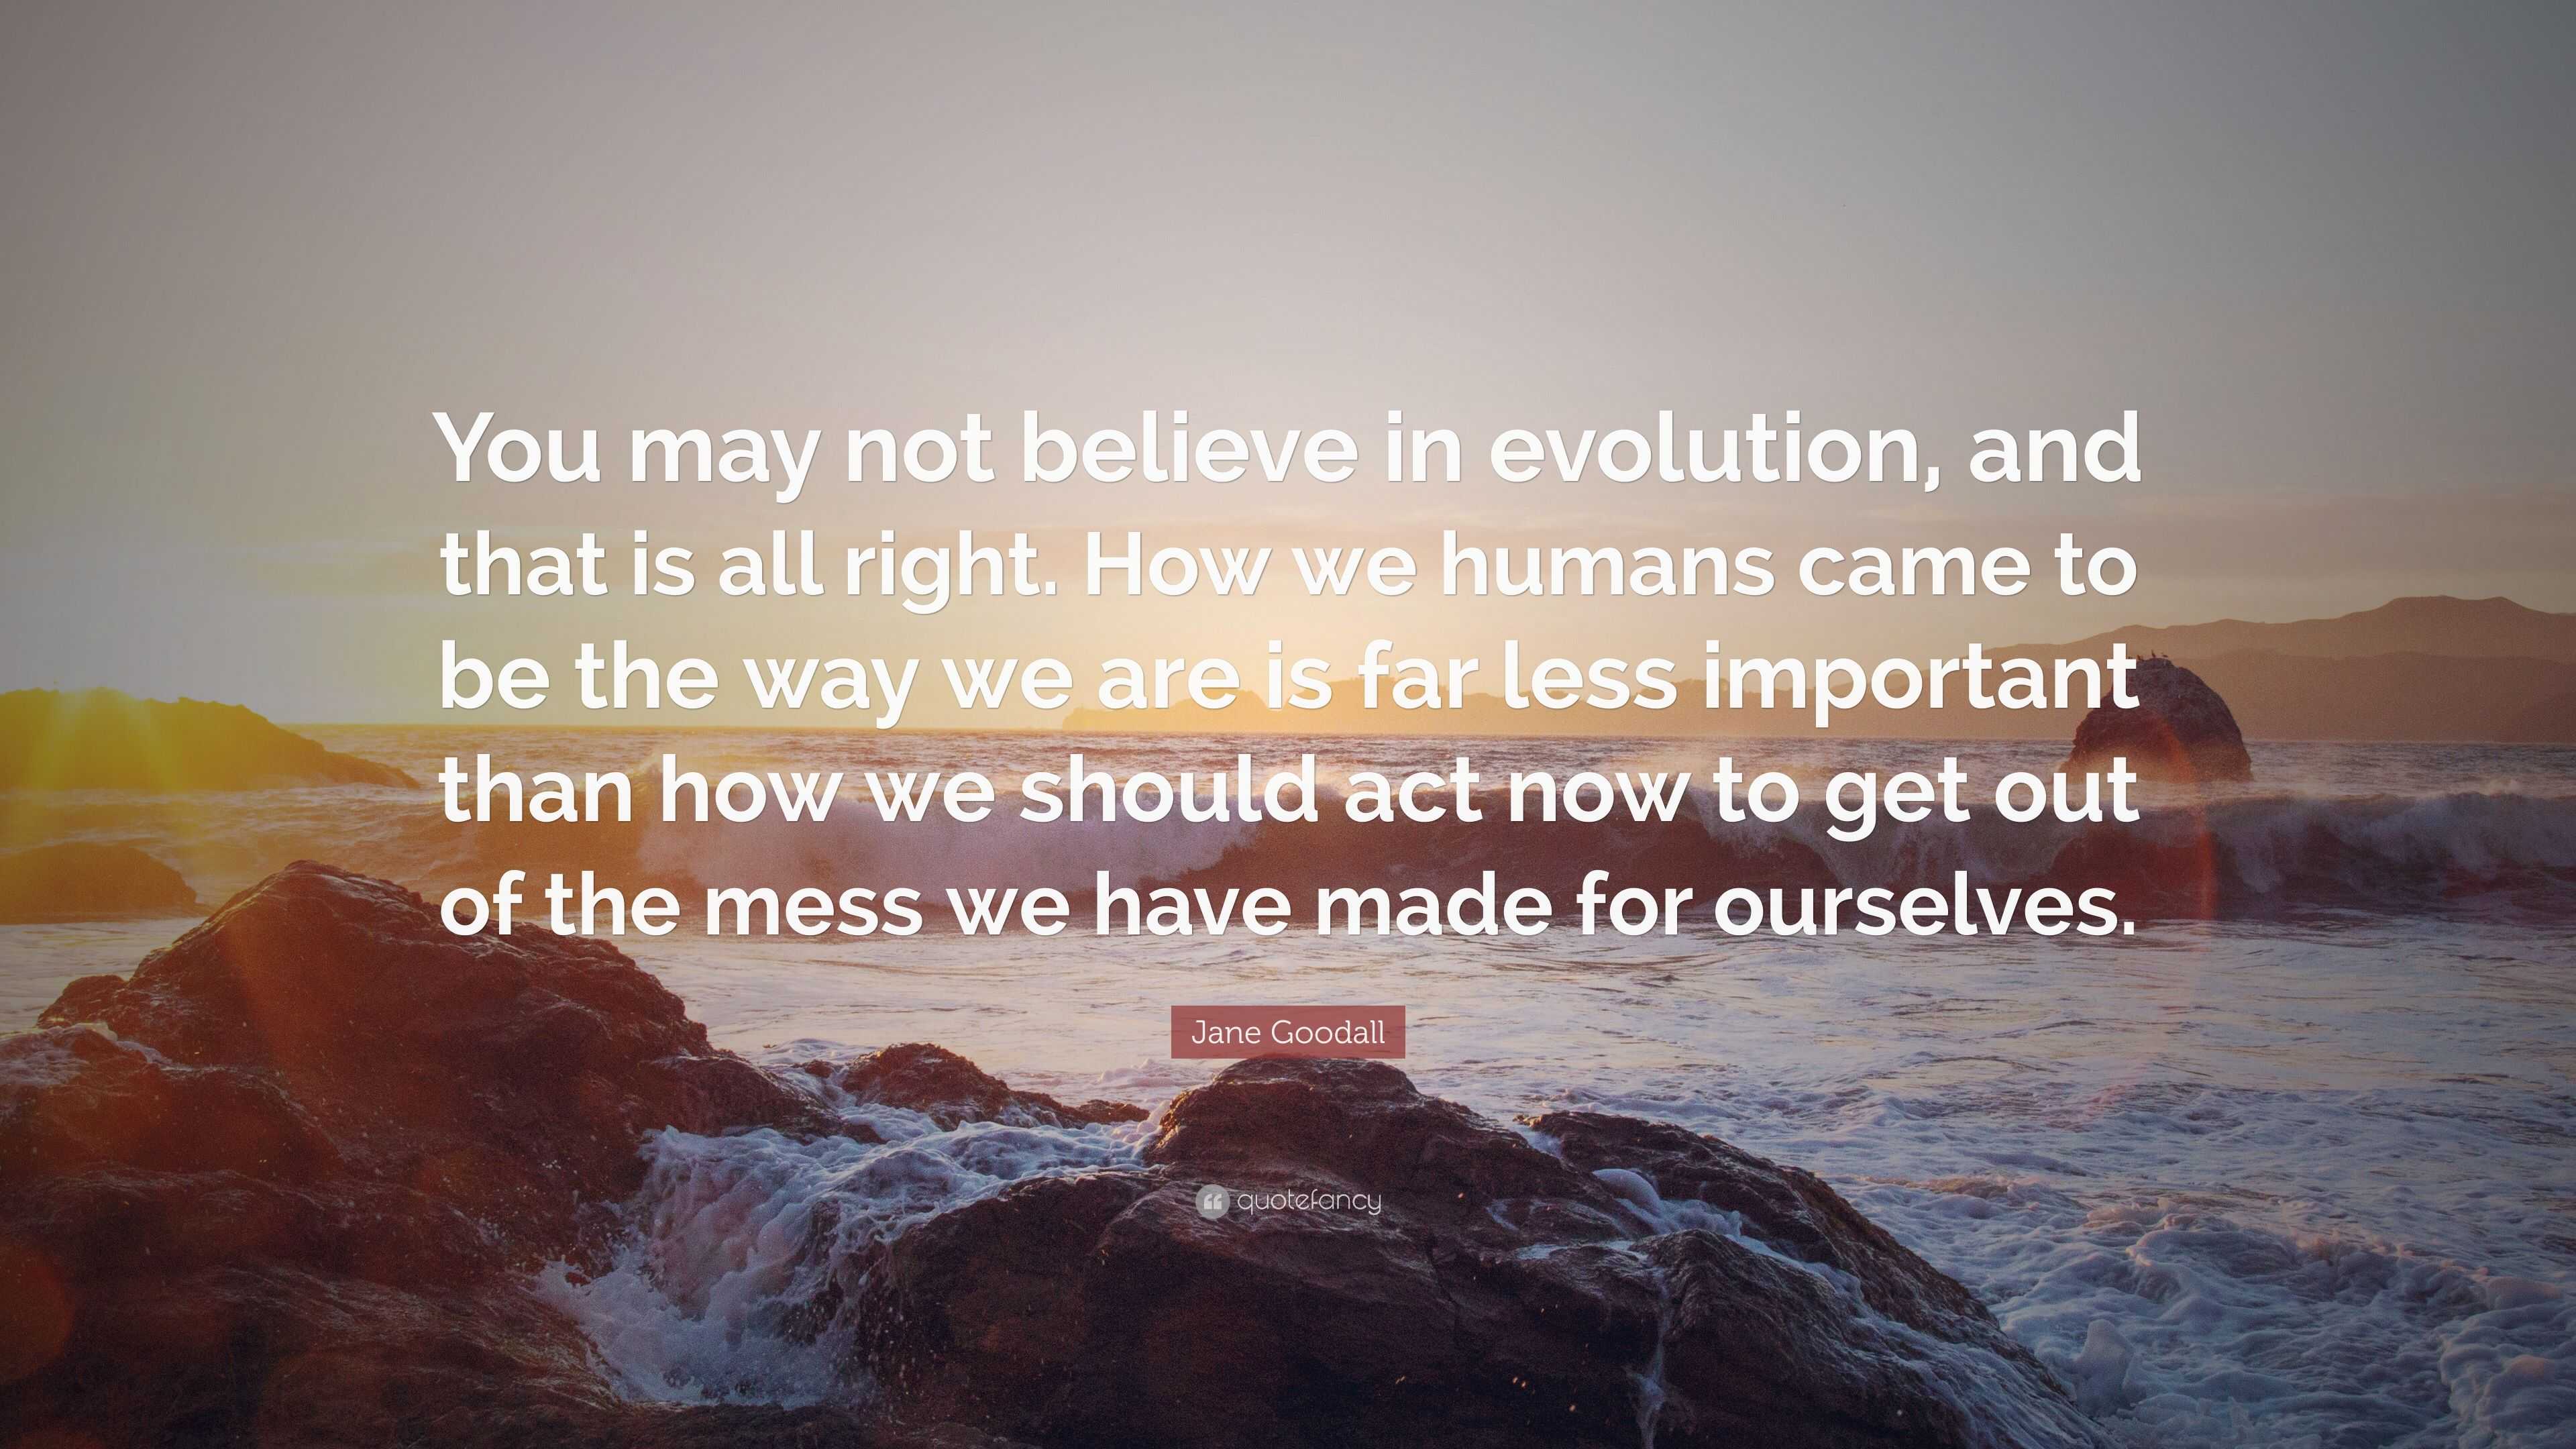 Jane Goodall Quote: “You may not believe in evolution, and that is all ...